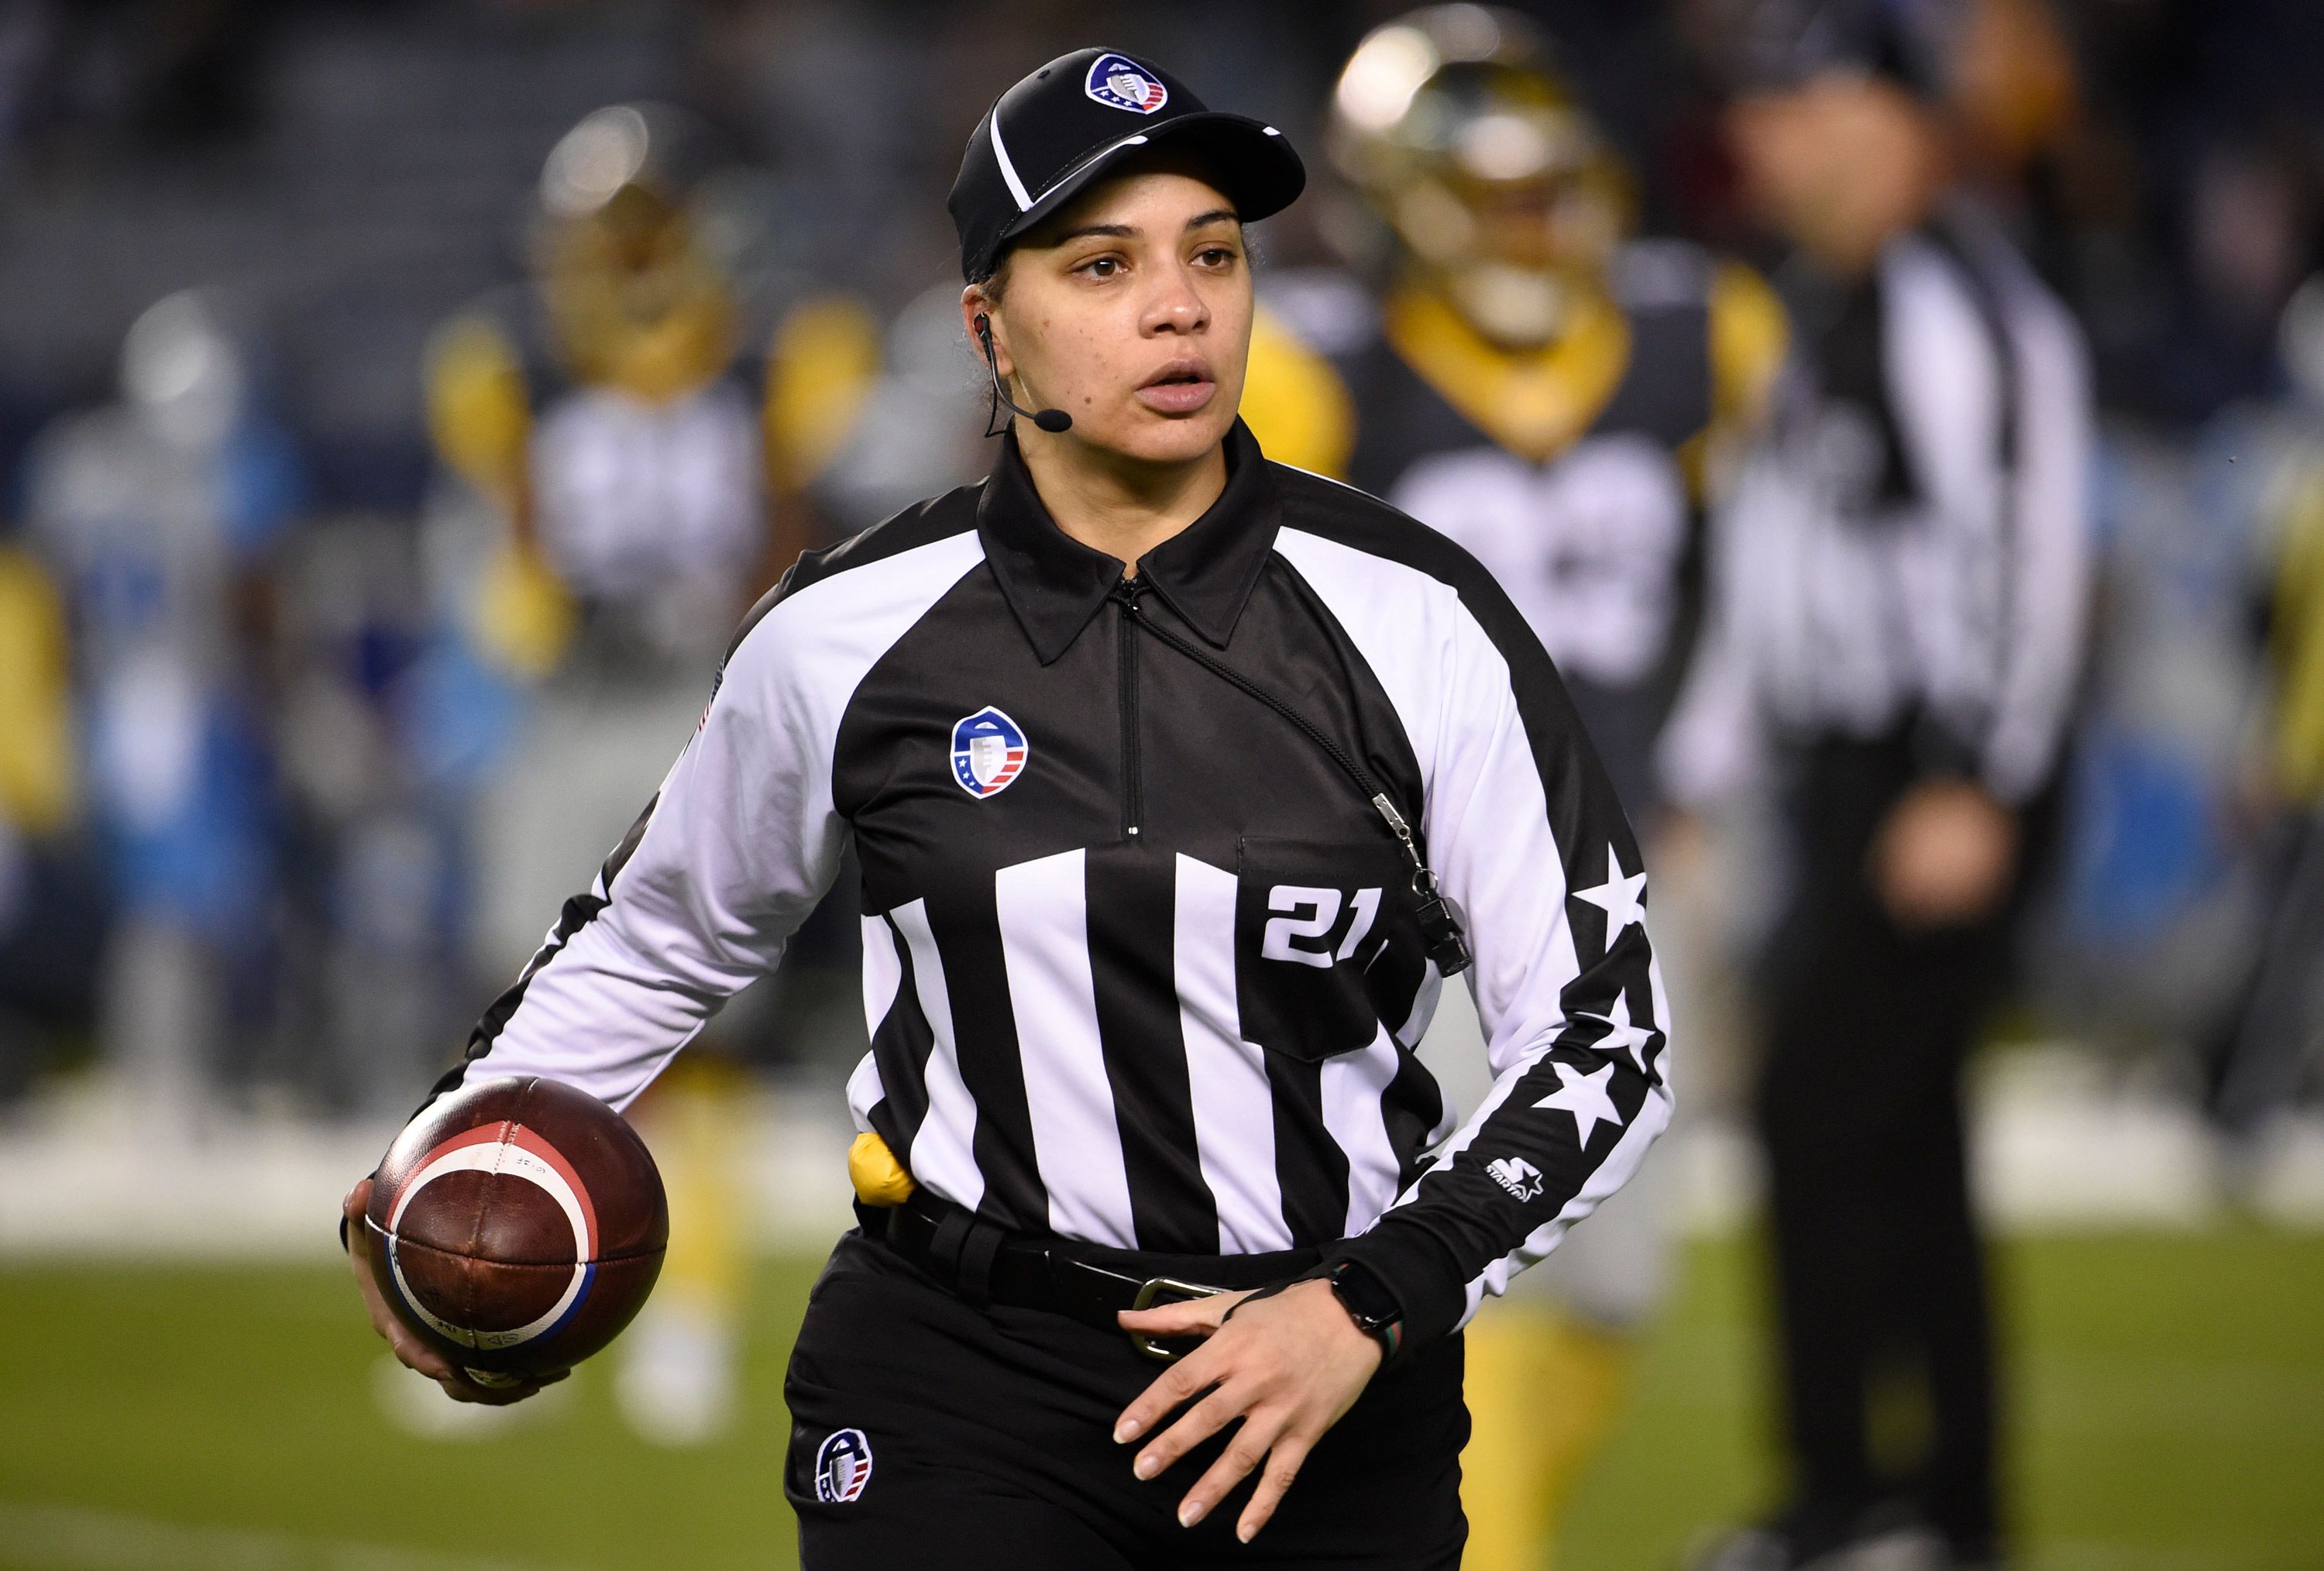 NFL picks its first Black female game official